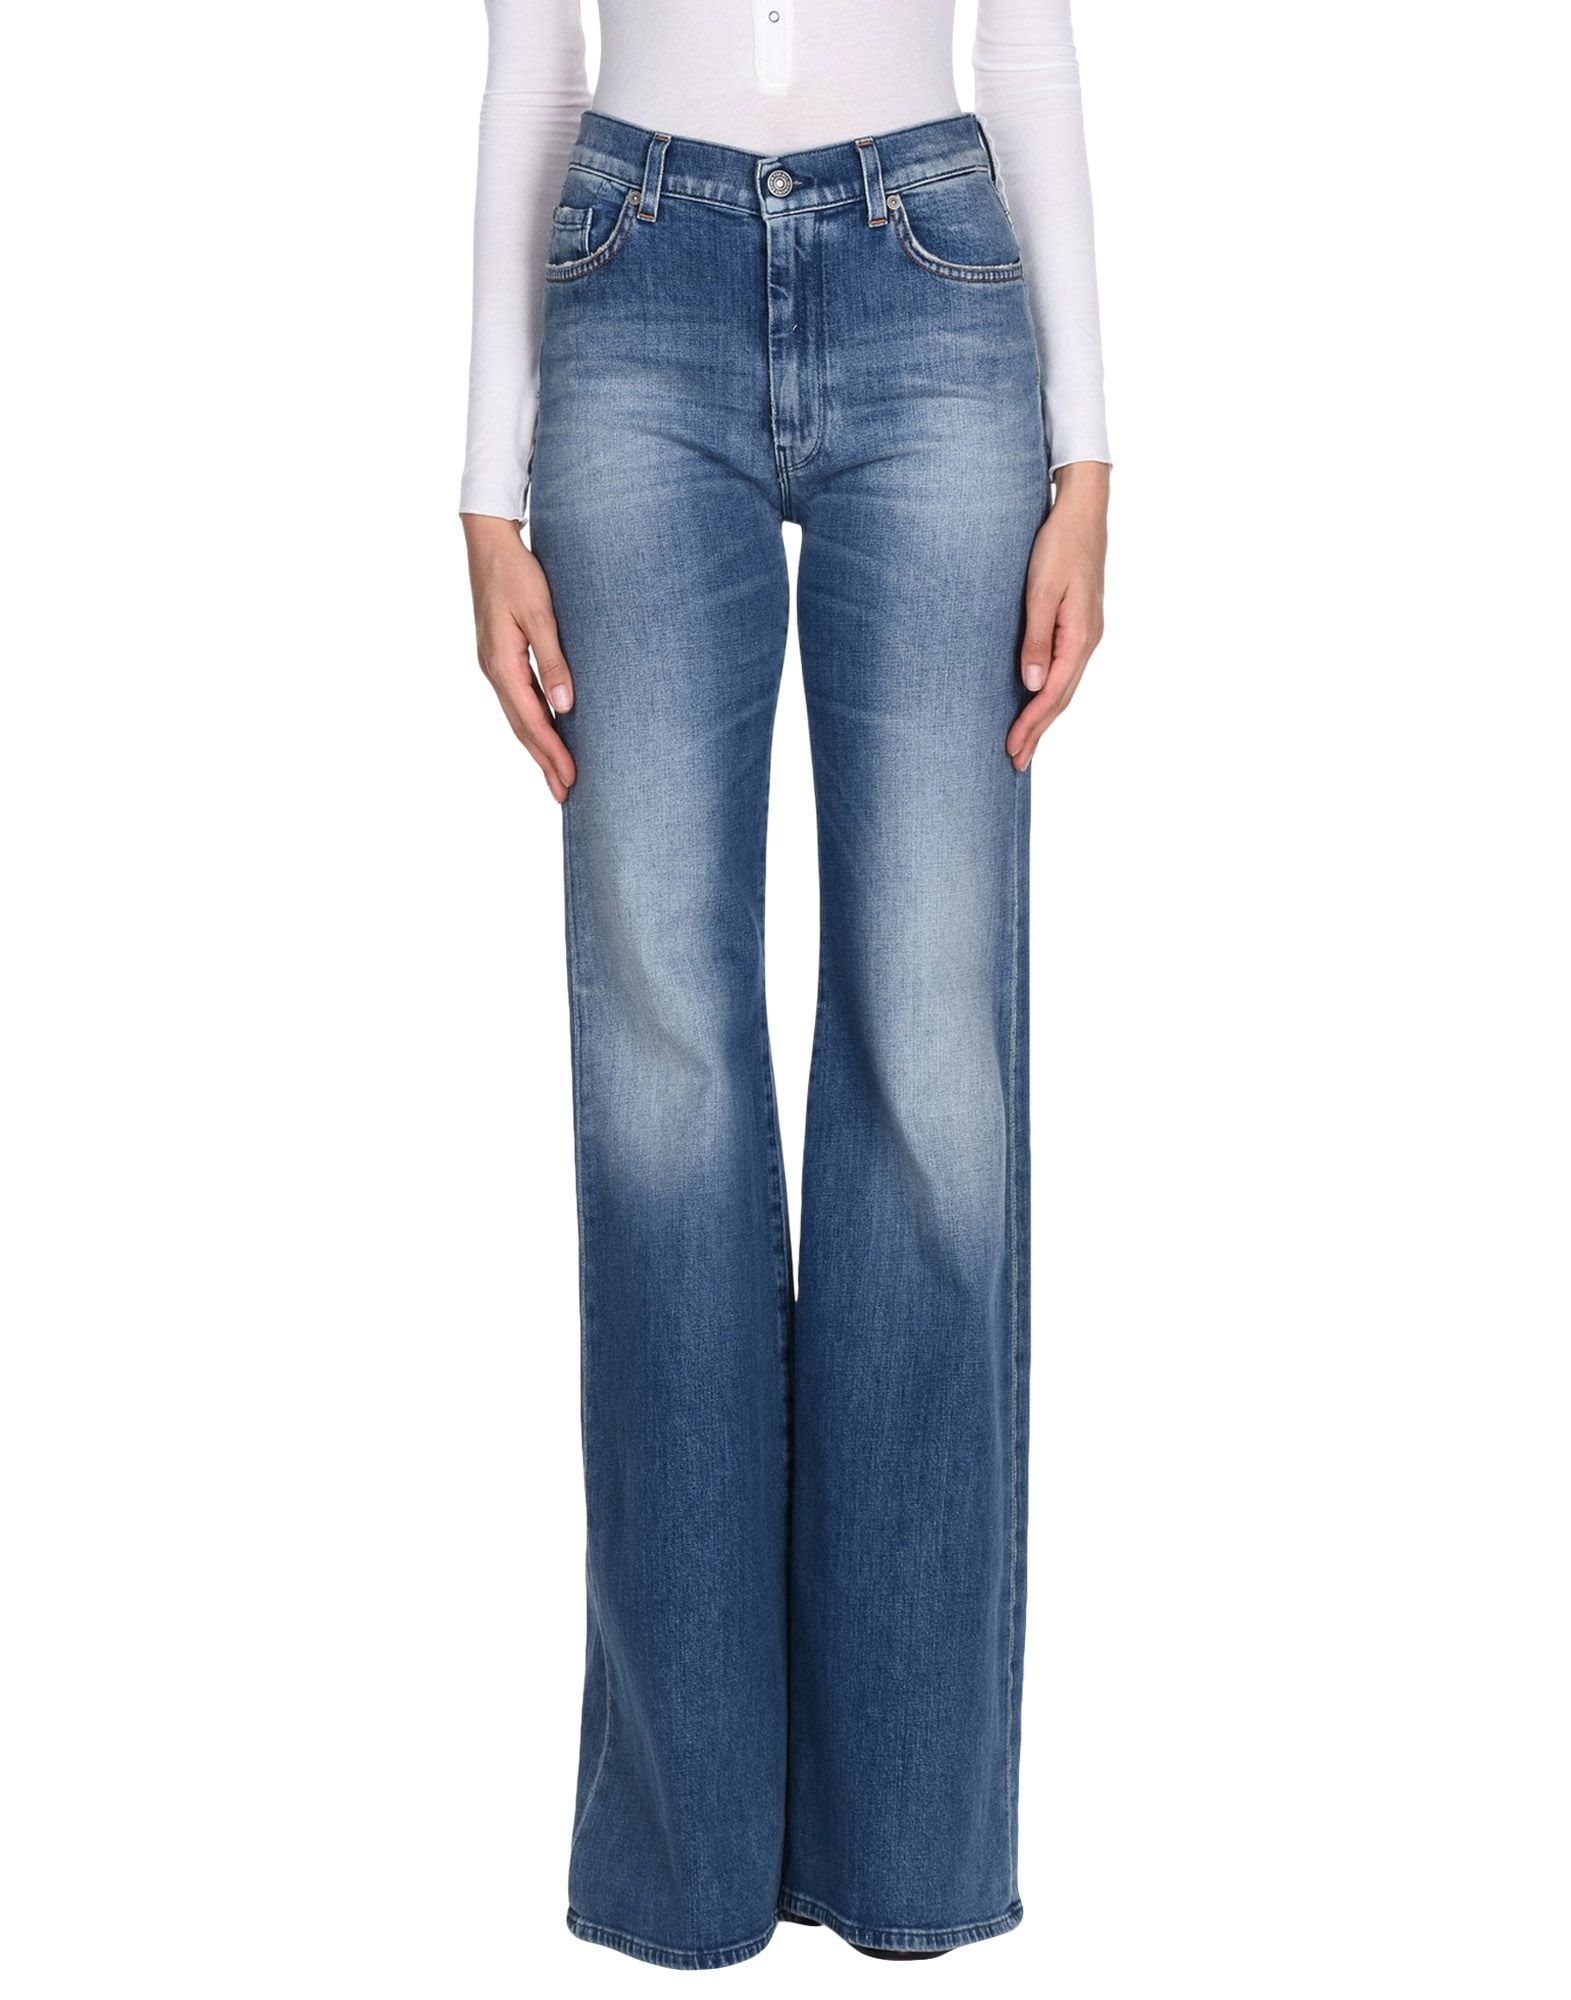 7 FOR ALL MANKIND Denim trousers,42664233PV 3